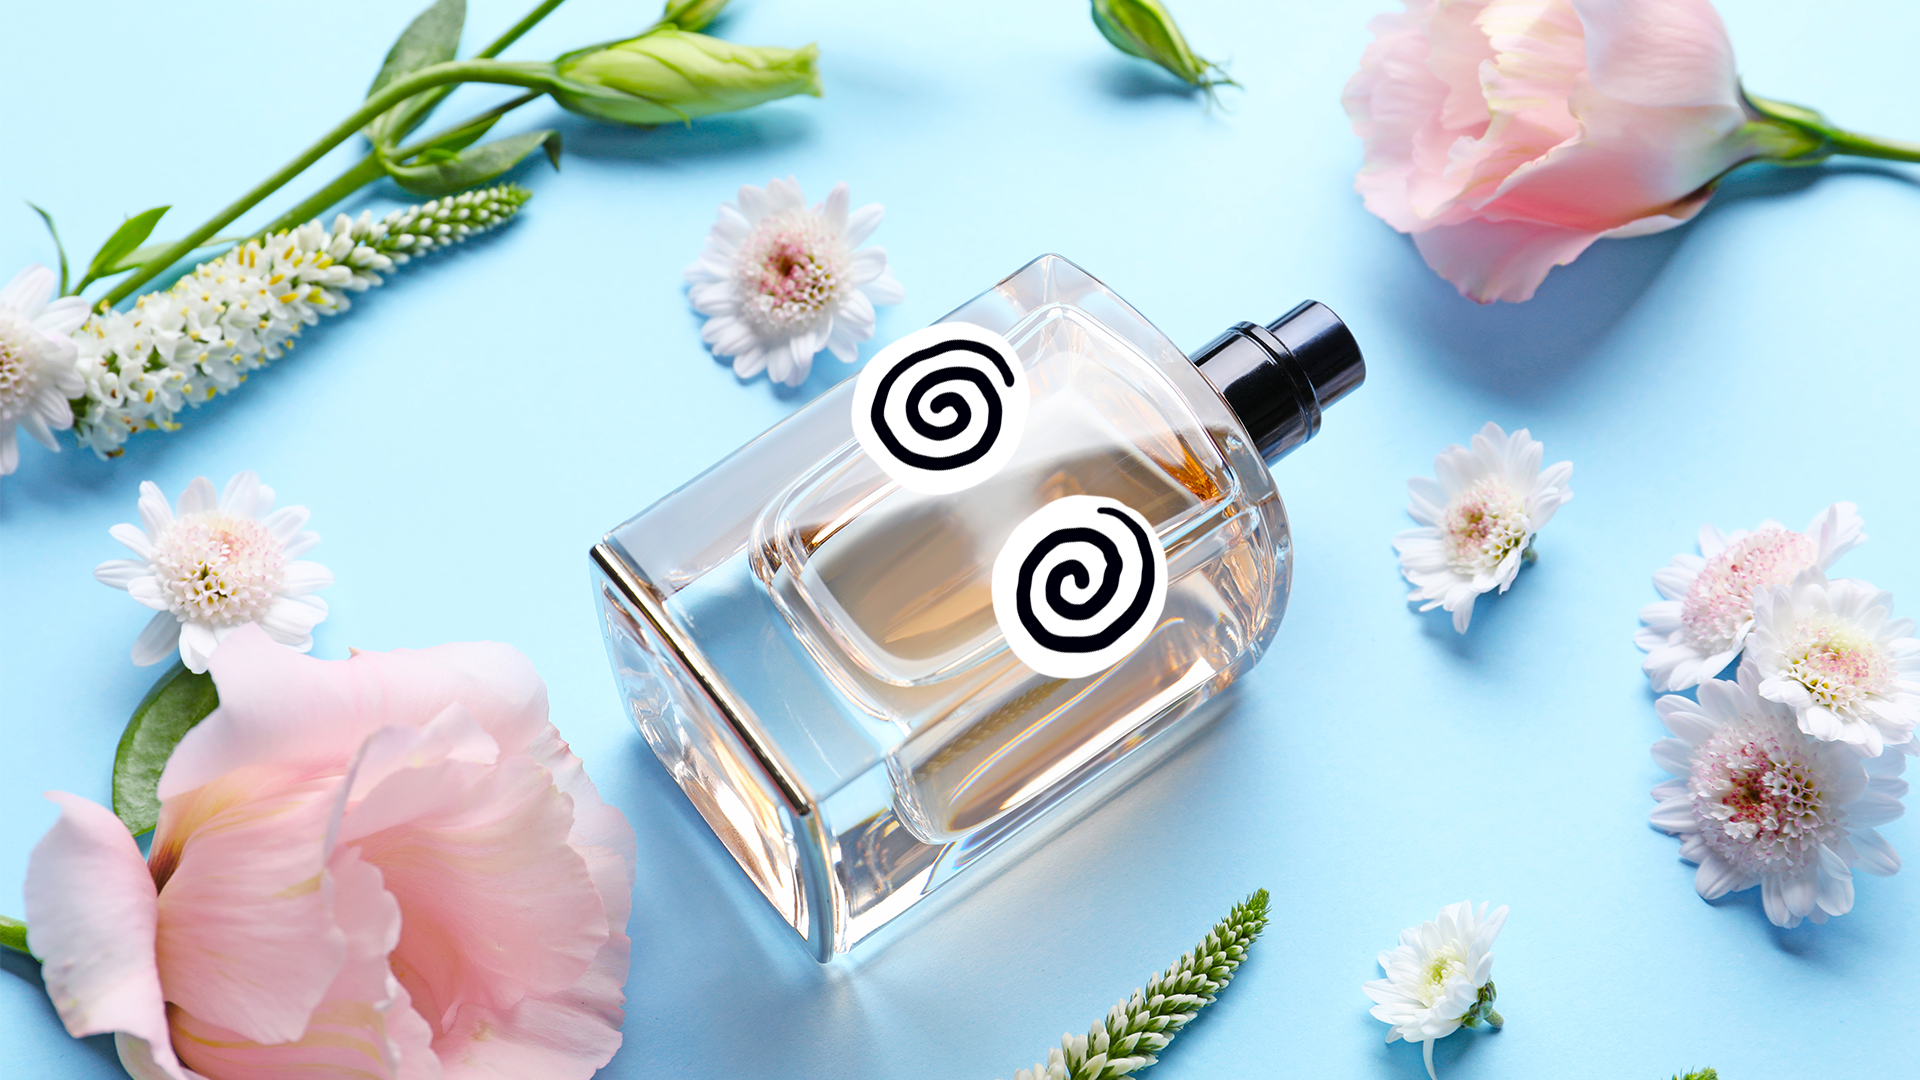 A bottle of perfume with dizzy eyes, surrounded by flowers